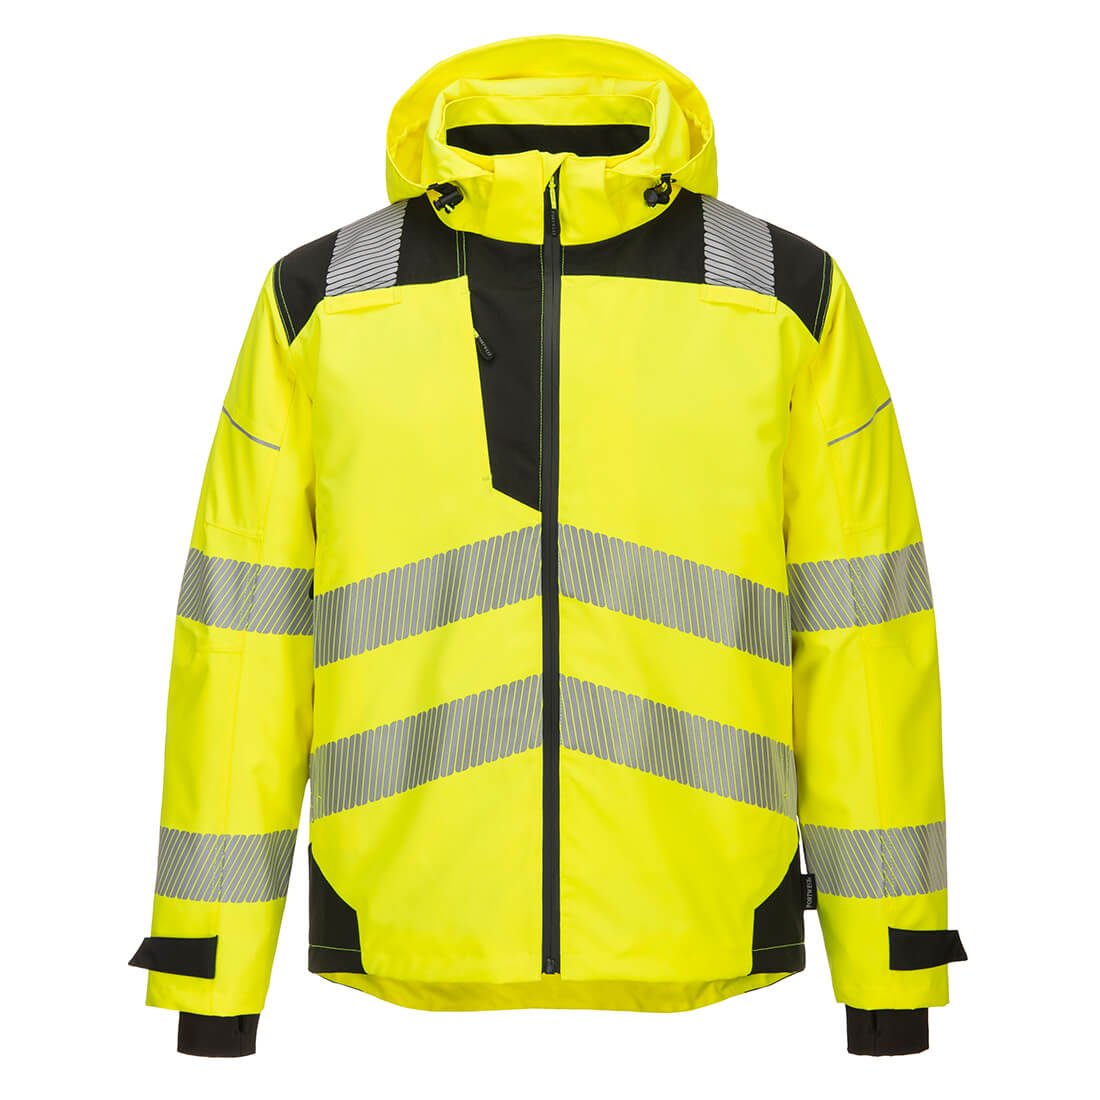 PW3 Extreme Breathable Rain Jacket | Scaffolding Supplies Limited